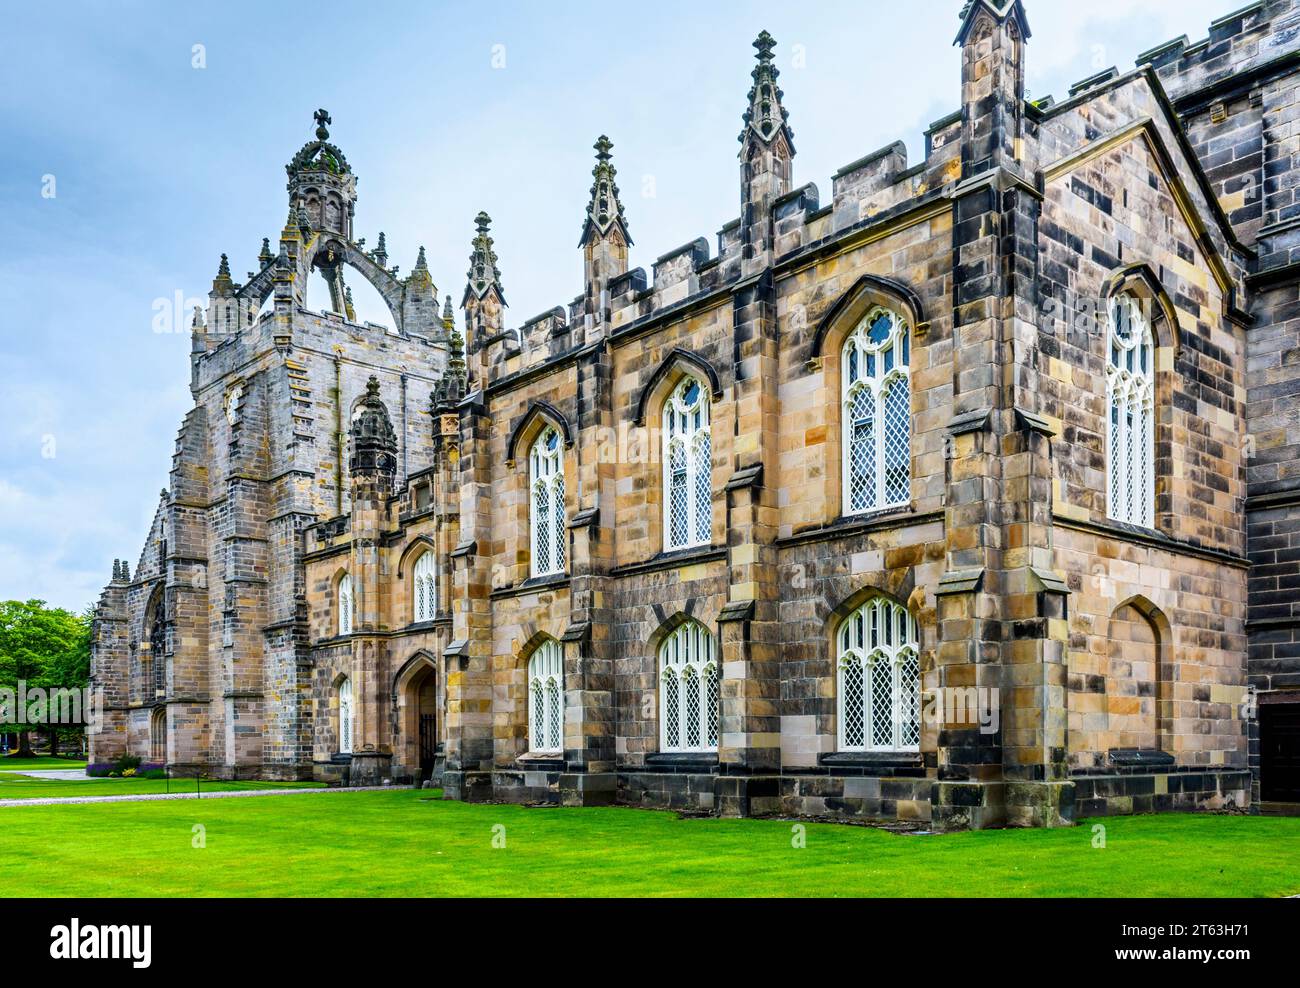 King's College Chapel building and the Crown Tower, University of Aberdeen, Old Aberdeen, Scotland, UK.  Late 15th century. Stock Photo